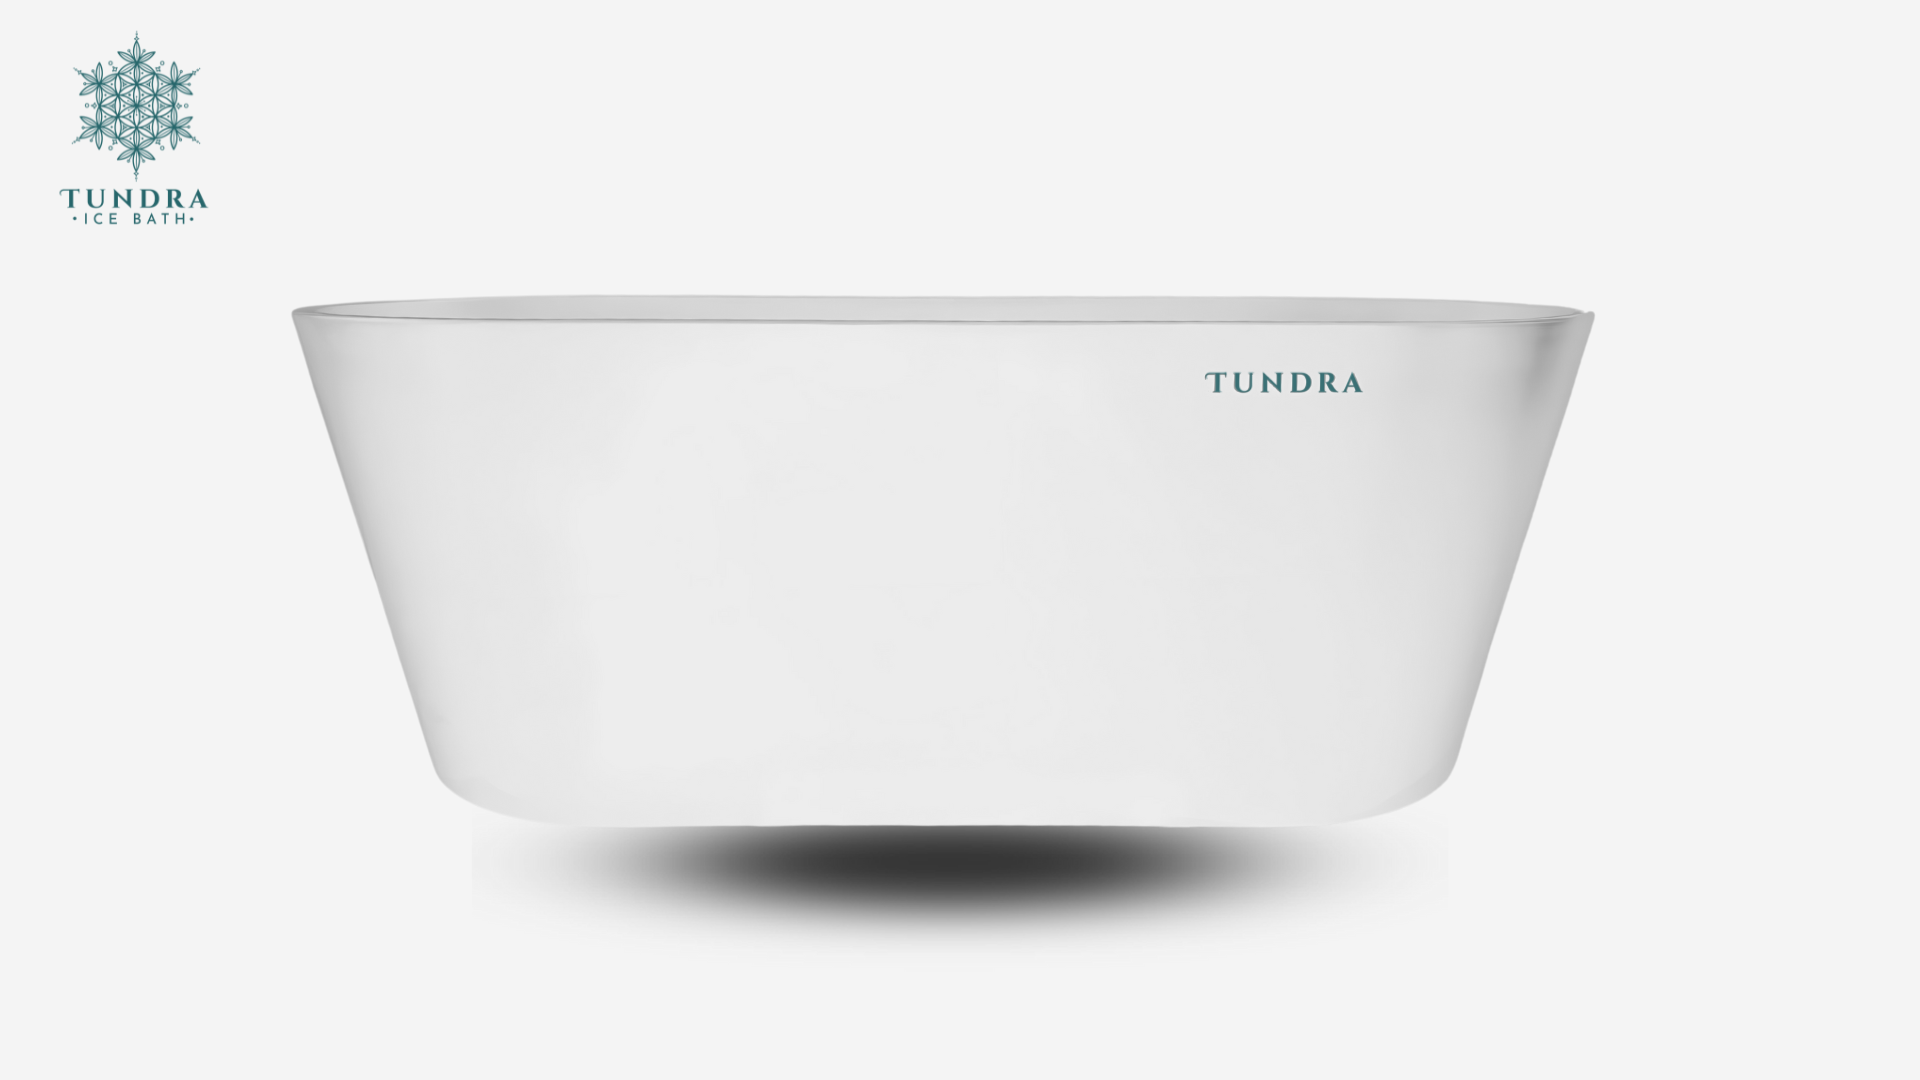 Presenting the TUNDRA Ice Bath Aurora, a space-efficient, oval-shaped cold therapy bath with durable dual-wall construction and temperature control between 3-42°C. Features LED lighting, efficient drainage, and pairs with Borealis Cooler & Heater. Ideal for compact spaces.